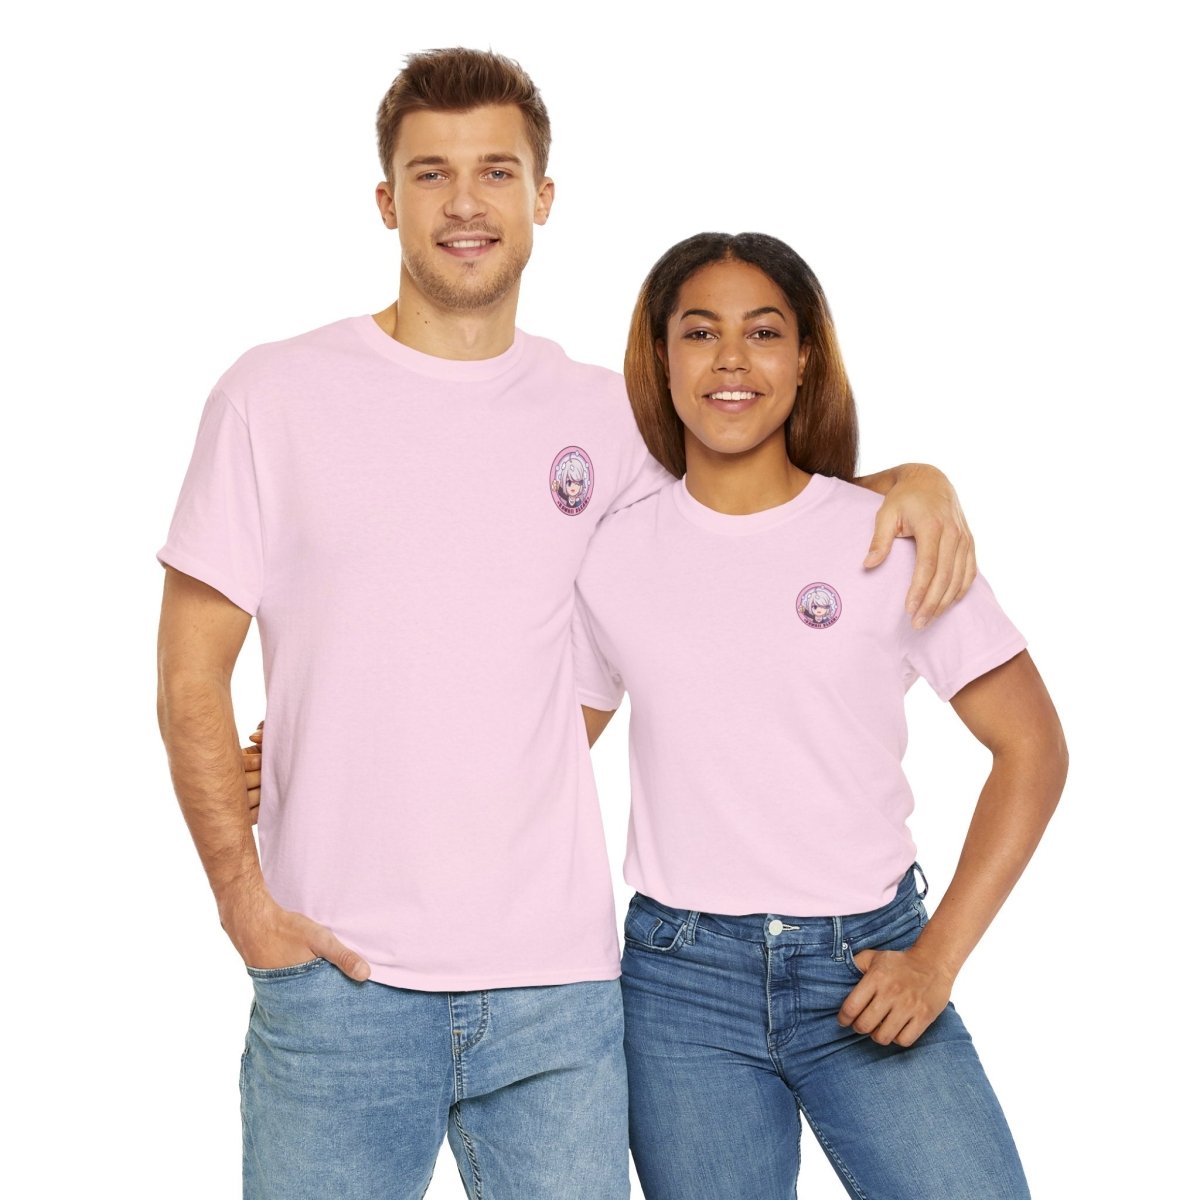 Male and female models posing together, facing the camera, in pink T-shirts with a pink 'Kawaii Klean' logo on the left chest, showcasing the monochromatic elegance and vibrant design